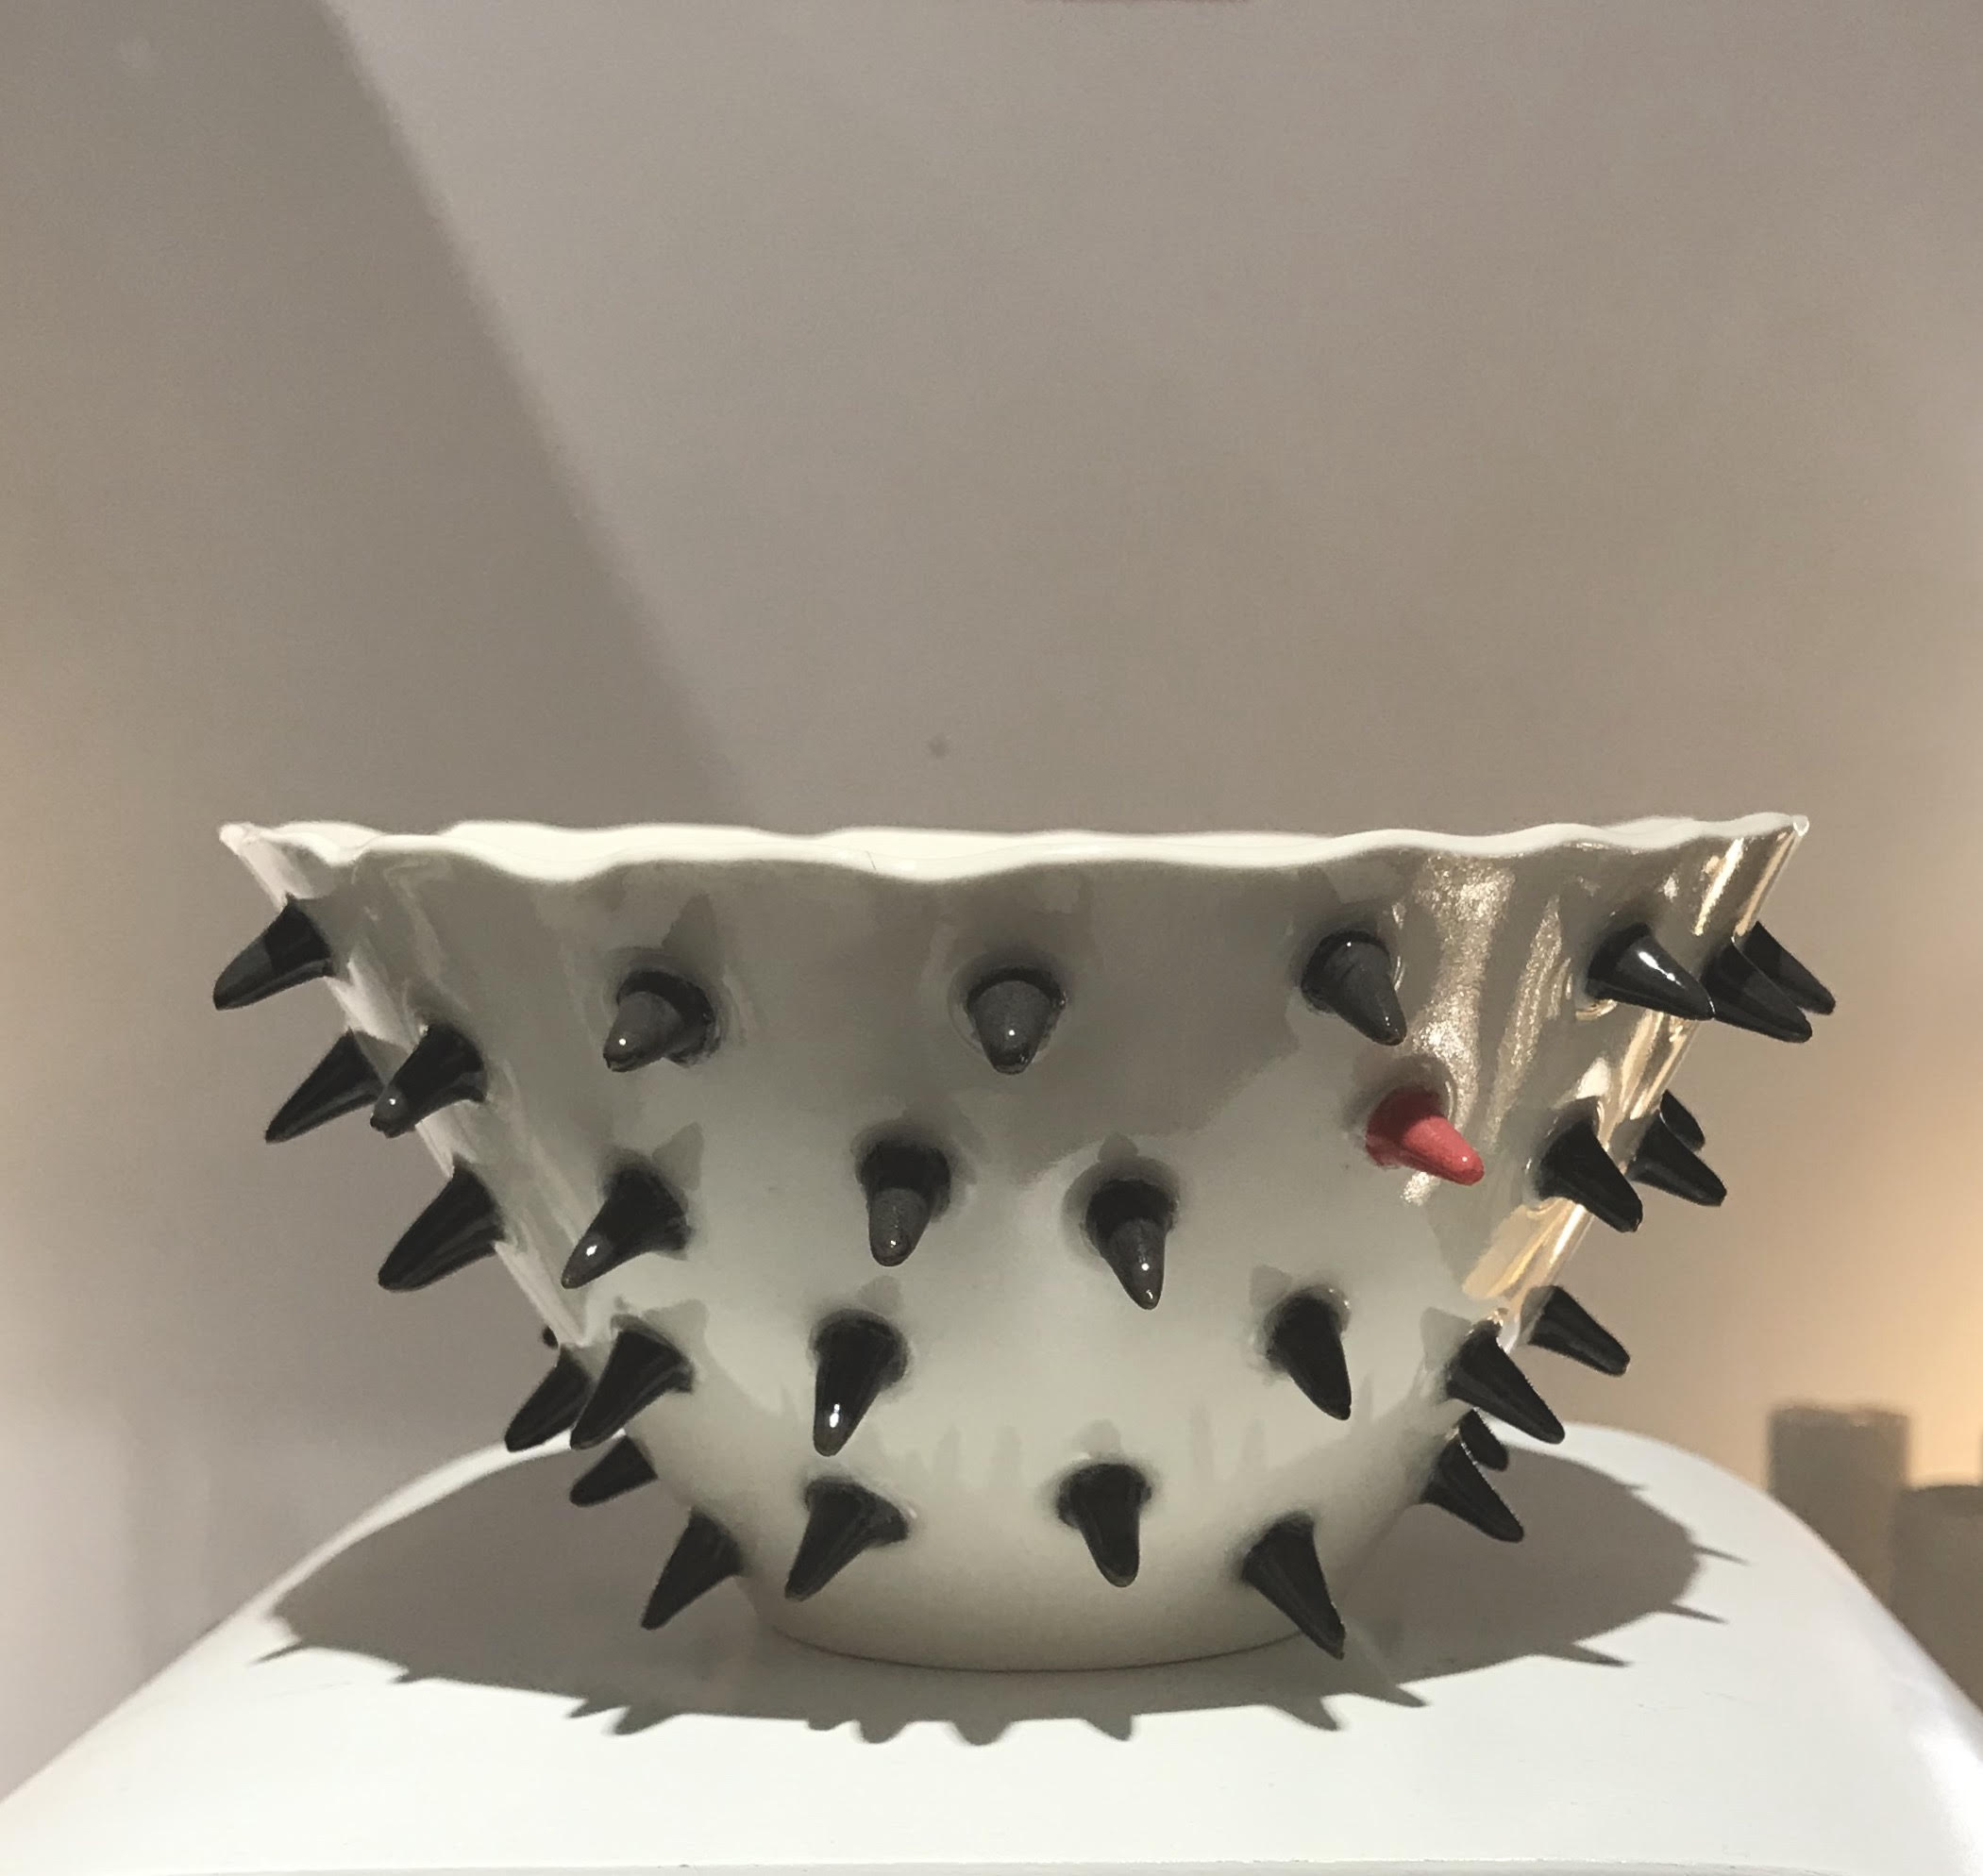 Small porcelain bowl with black spikes